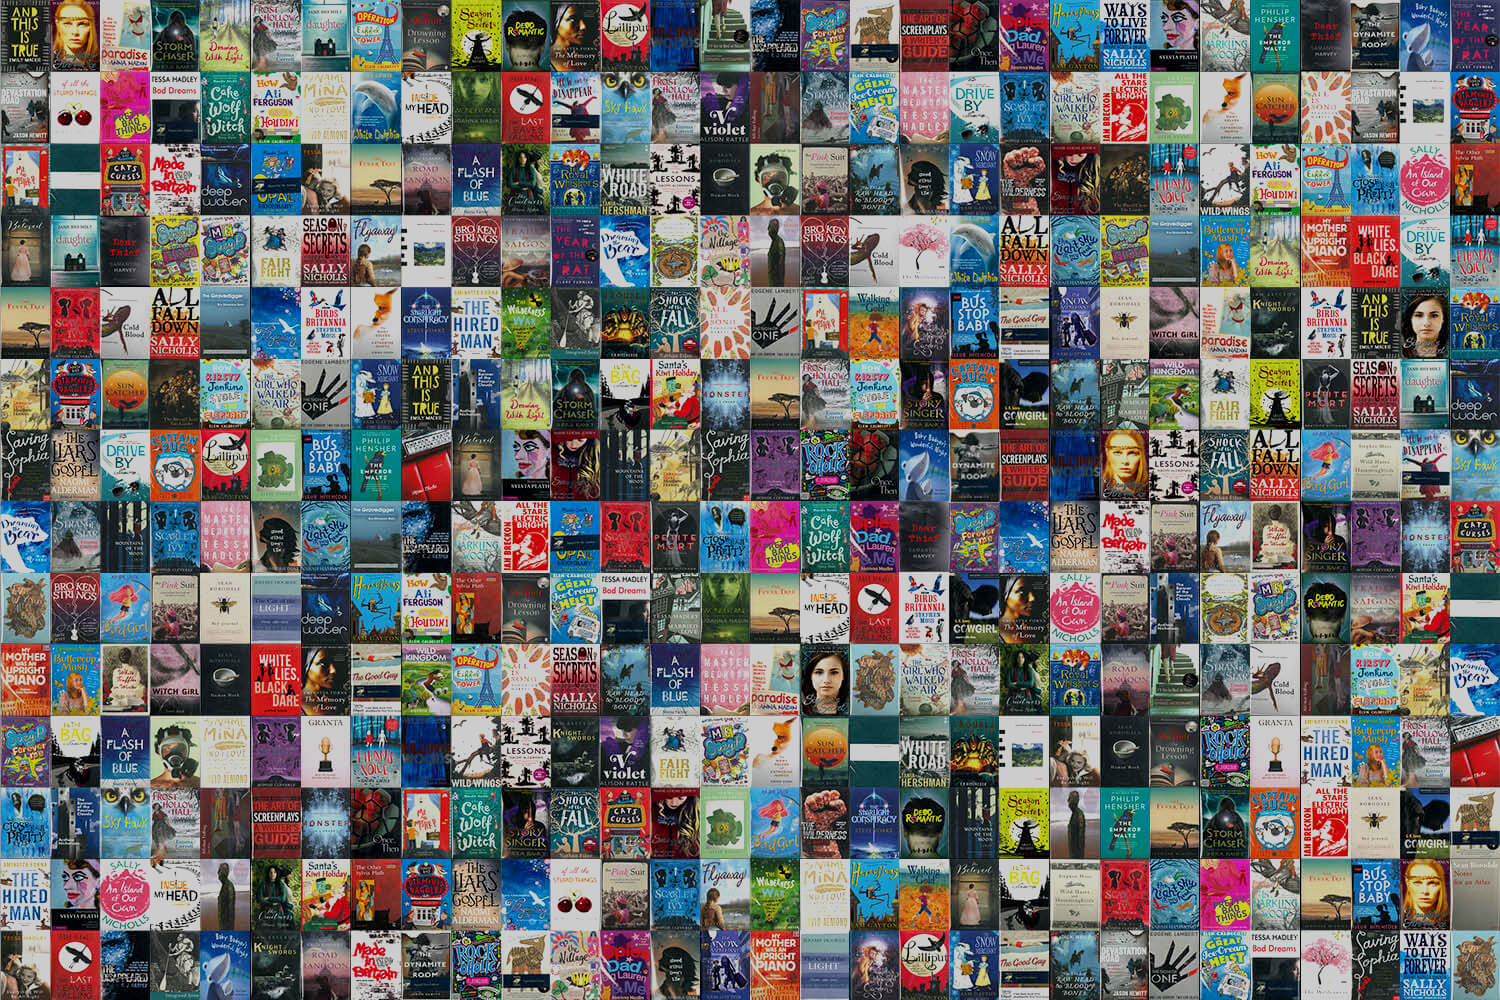 Montage of book covers from Bath Spa University's Creative Writing Department